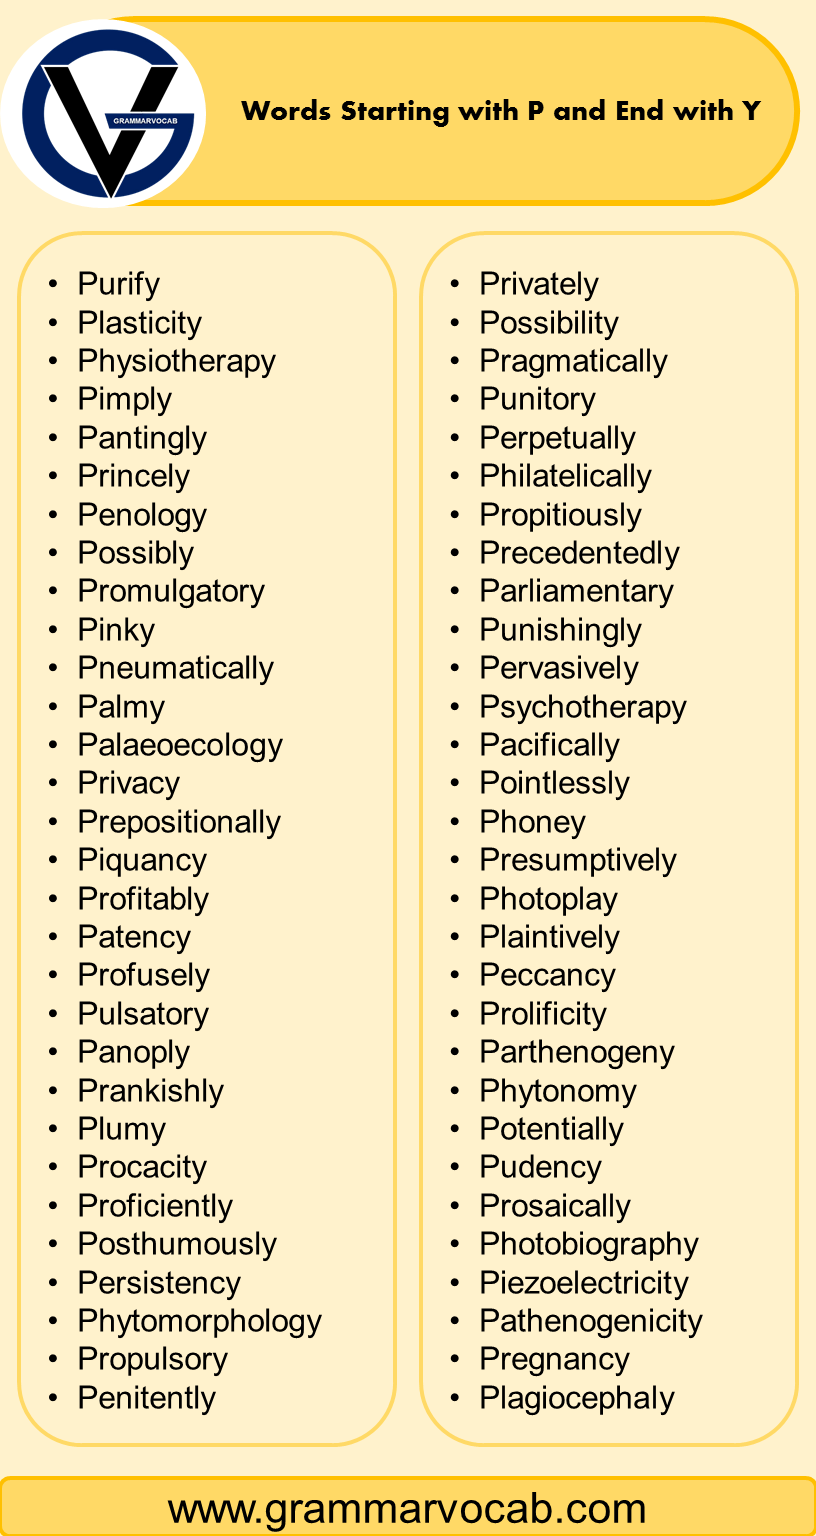 Words That Begin with P and End with Y